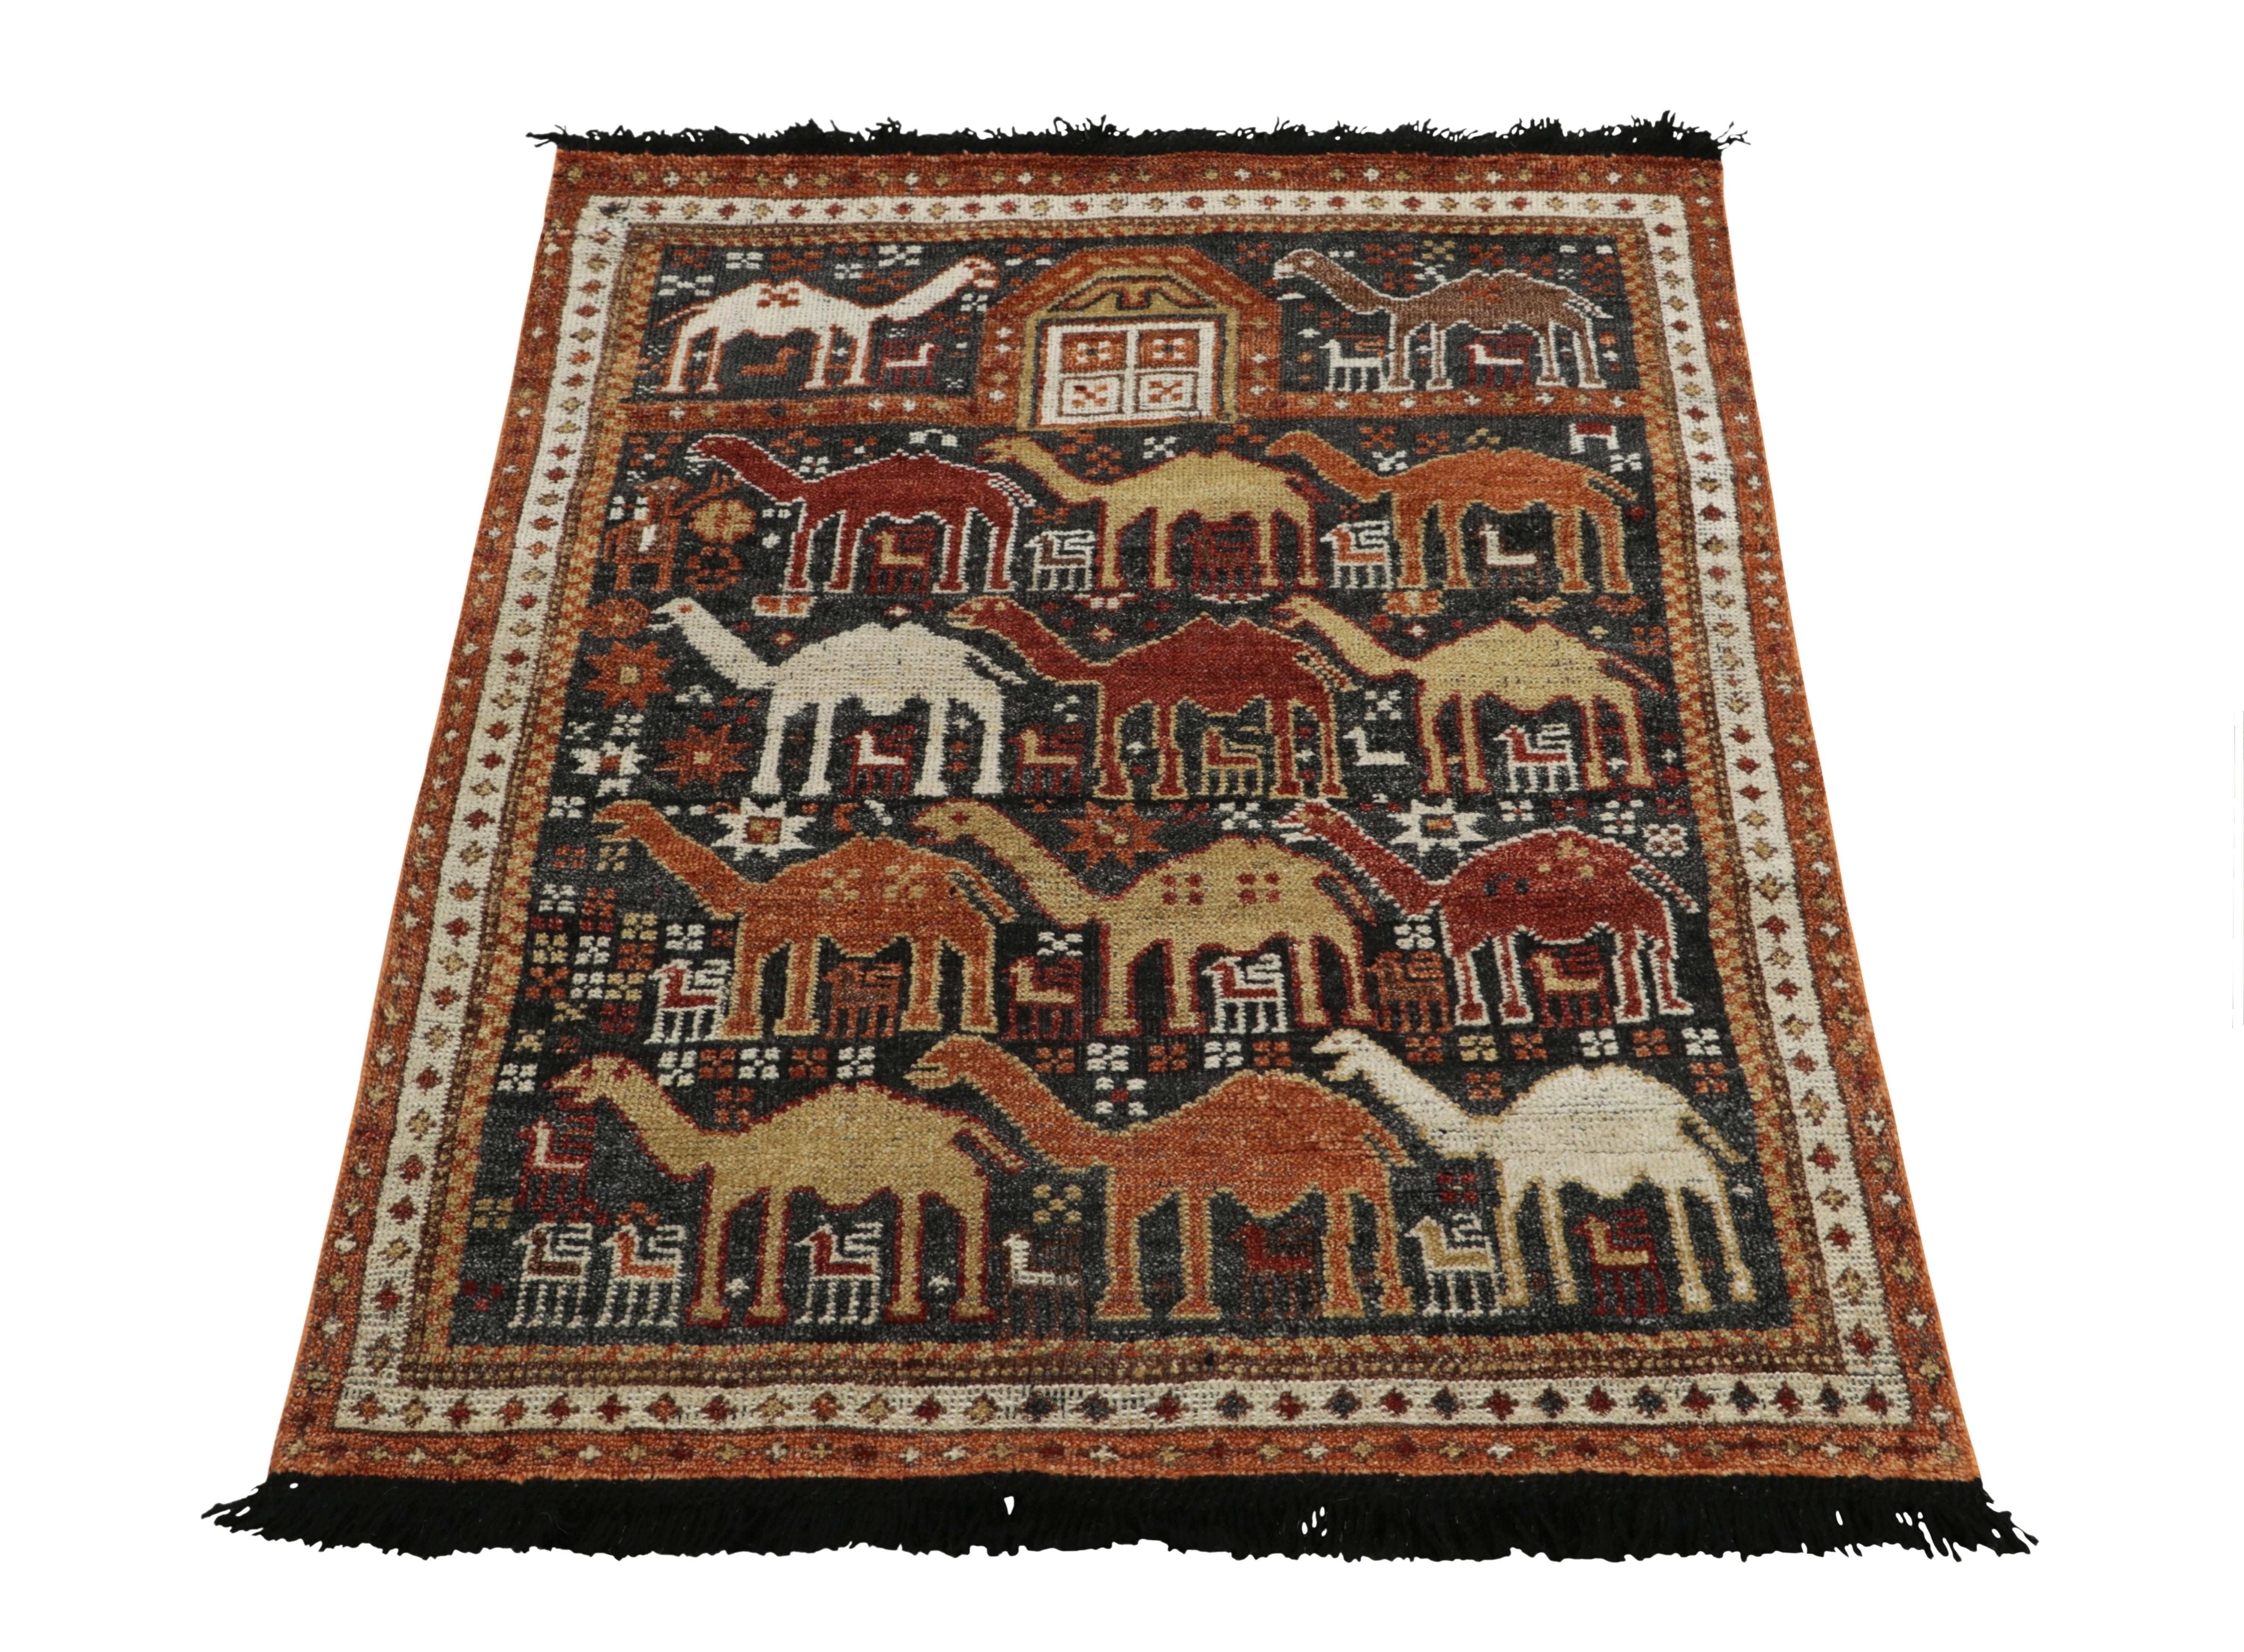 Connoting a unique contemporary approach to tribal sensibilities, this 3x4 classic style rug from the Burano Collection by Rug & Kilim showcases a montage of distinguished pictorial patterns. The rustic drawing captures the eye with a union of